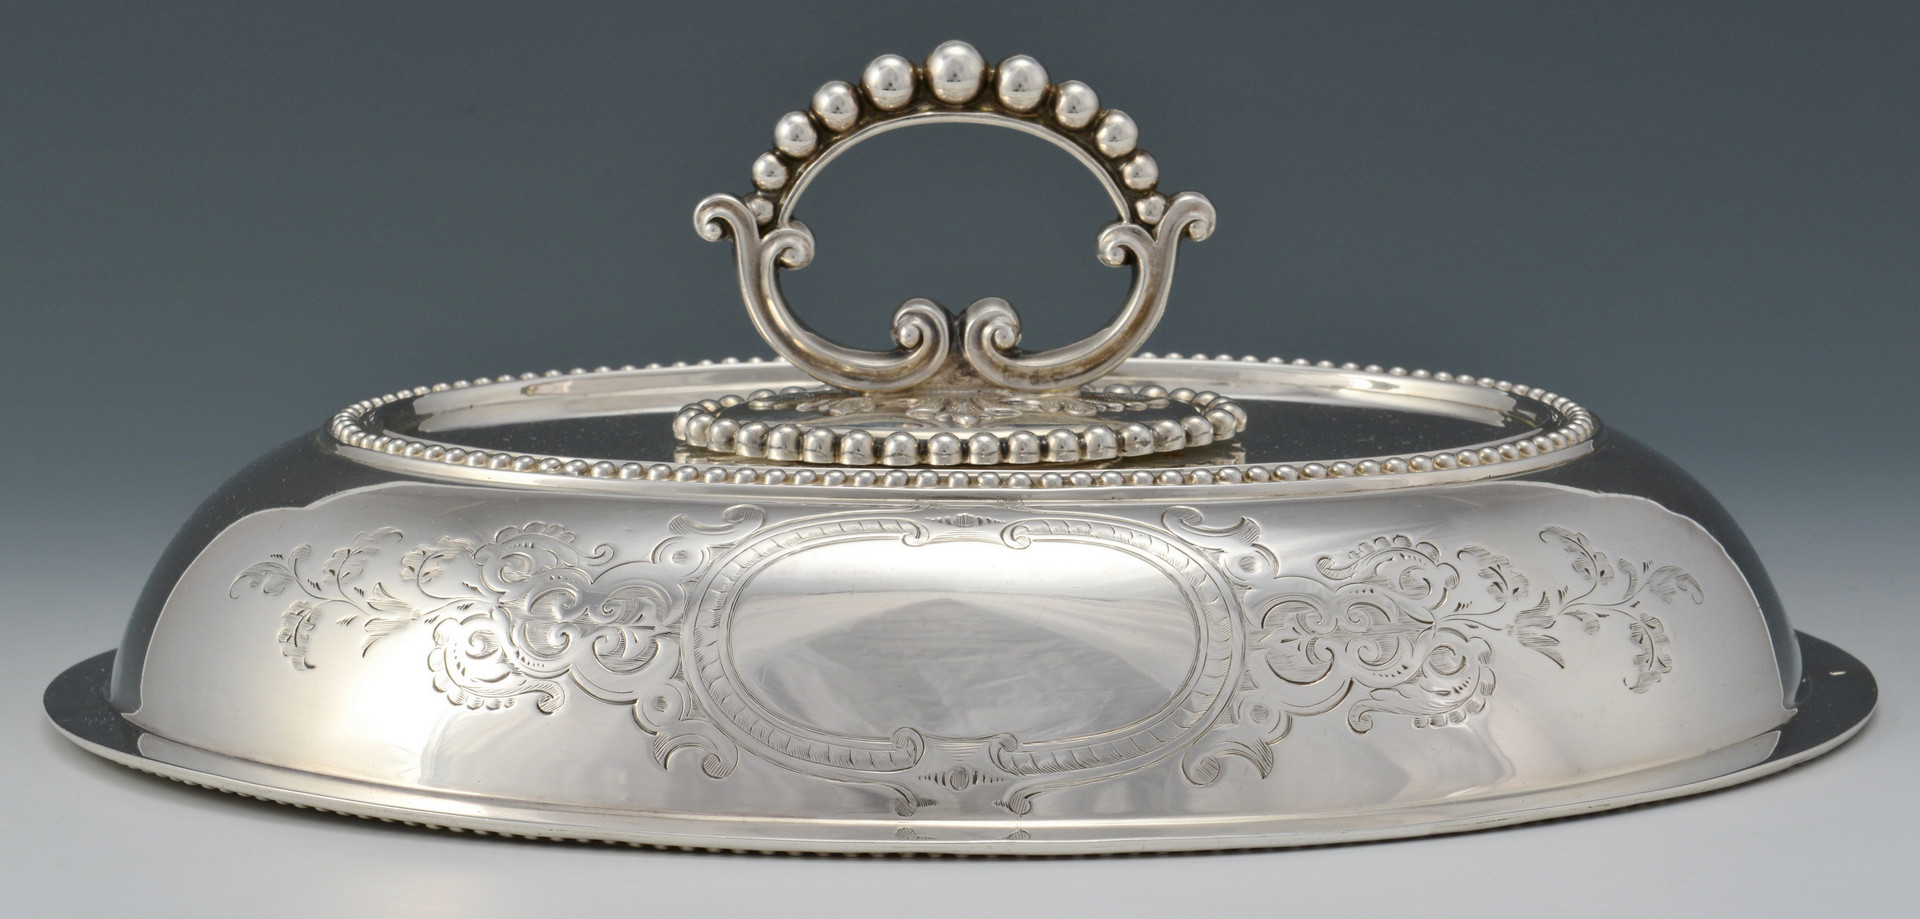 Lot 272: Pair Victorian Sterling Entree Dishes